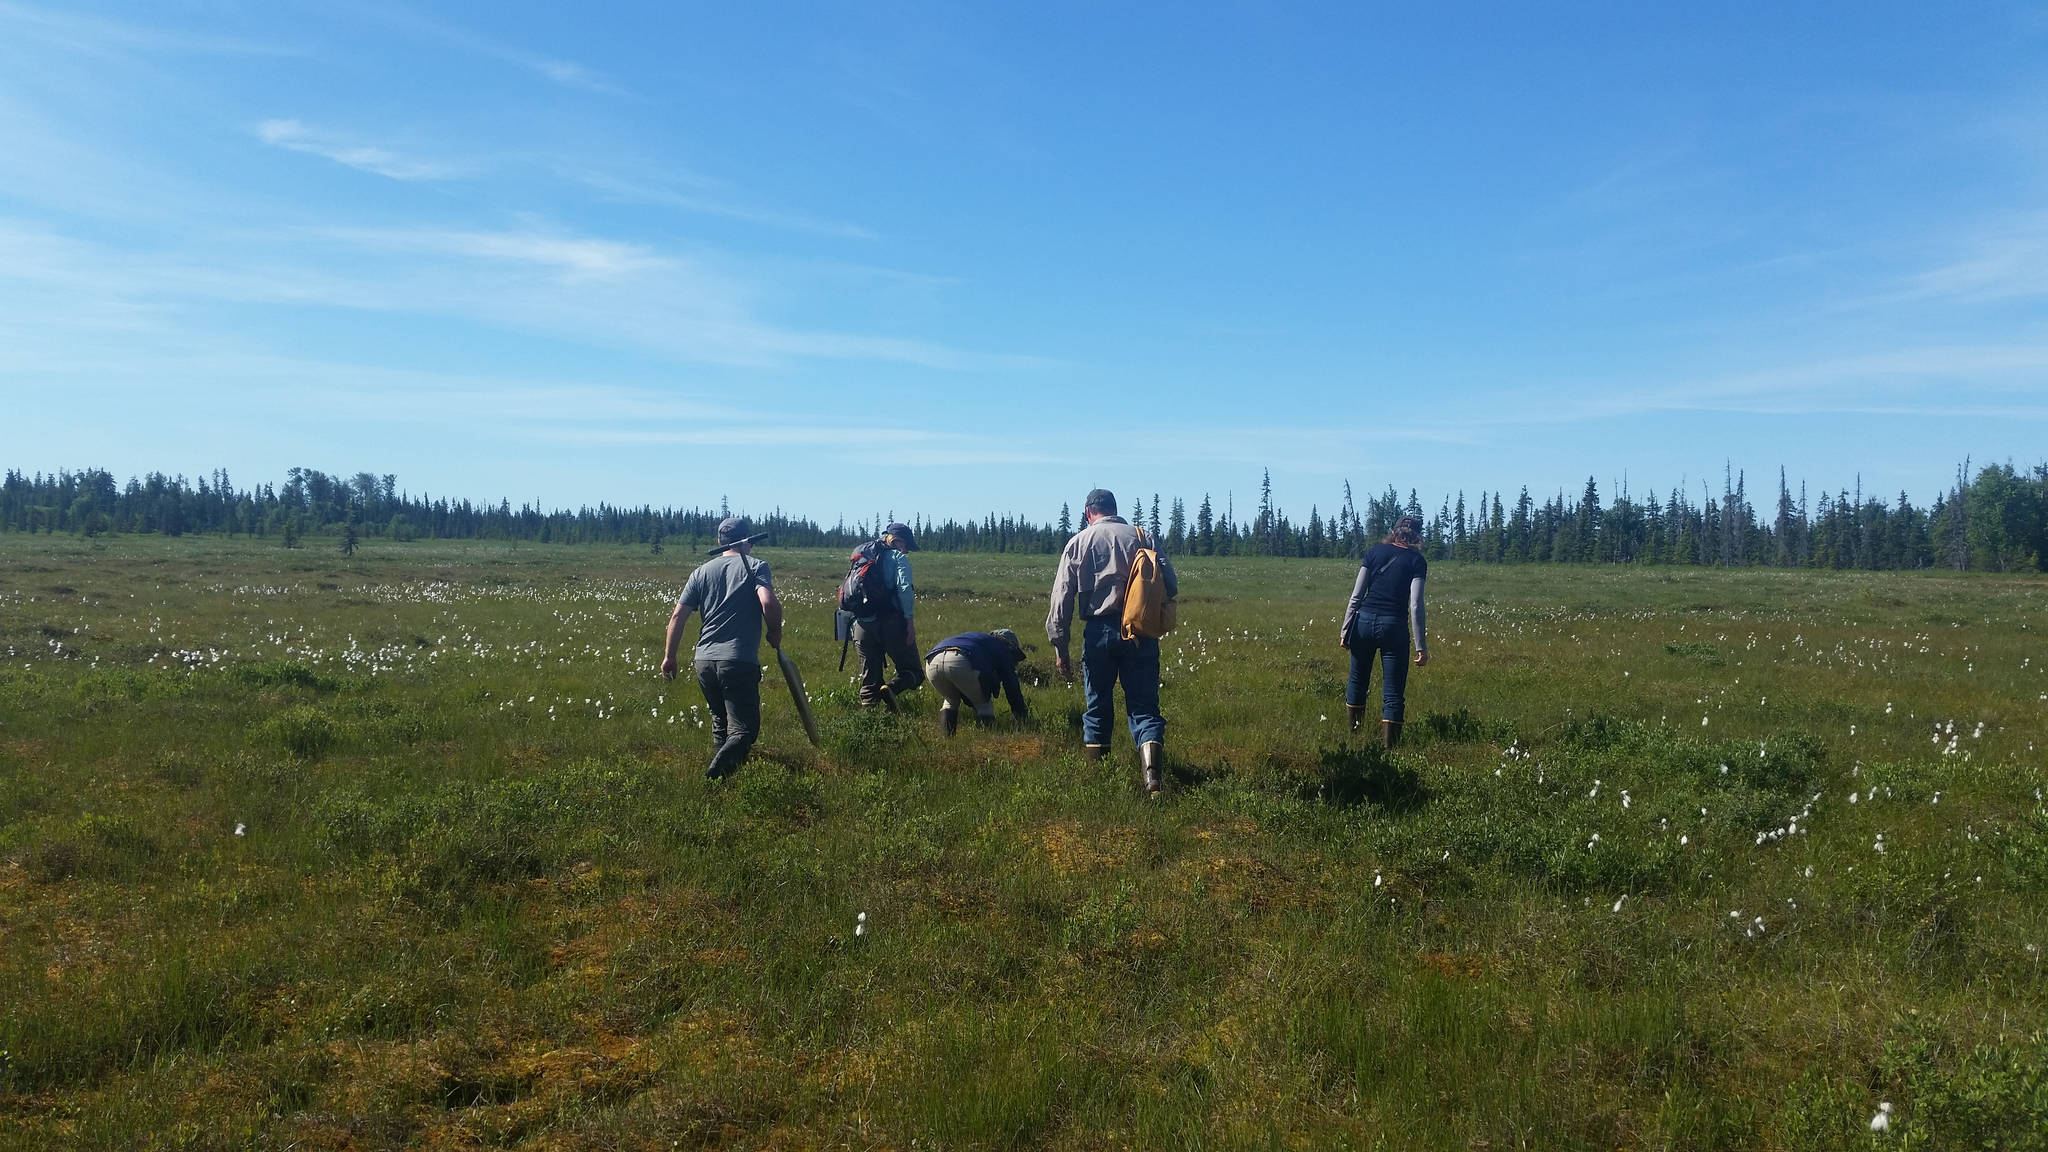 Workshop participants make their way into some peatlands near Anchor Point, Alaska for a field demonstration on July 18, 2018. (Photo by Mira Klein)